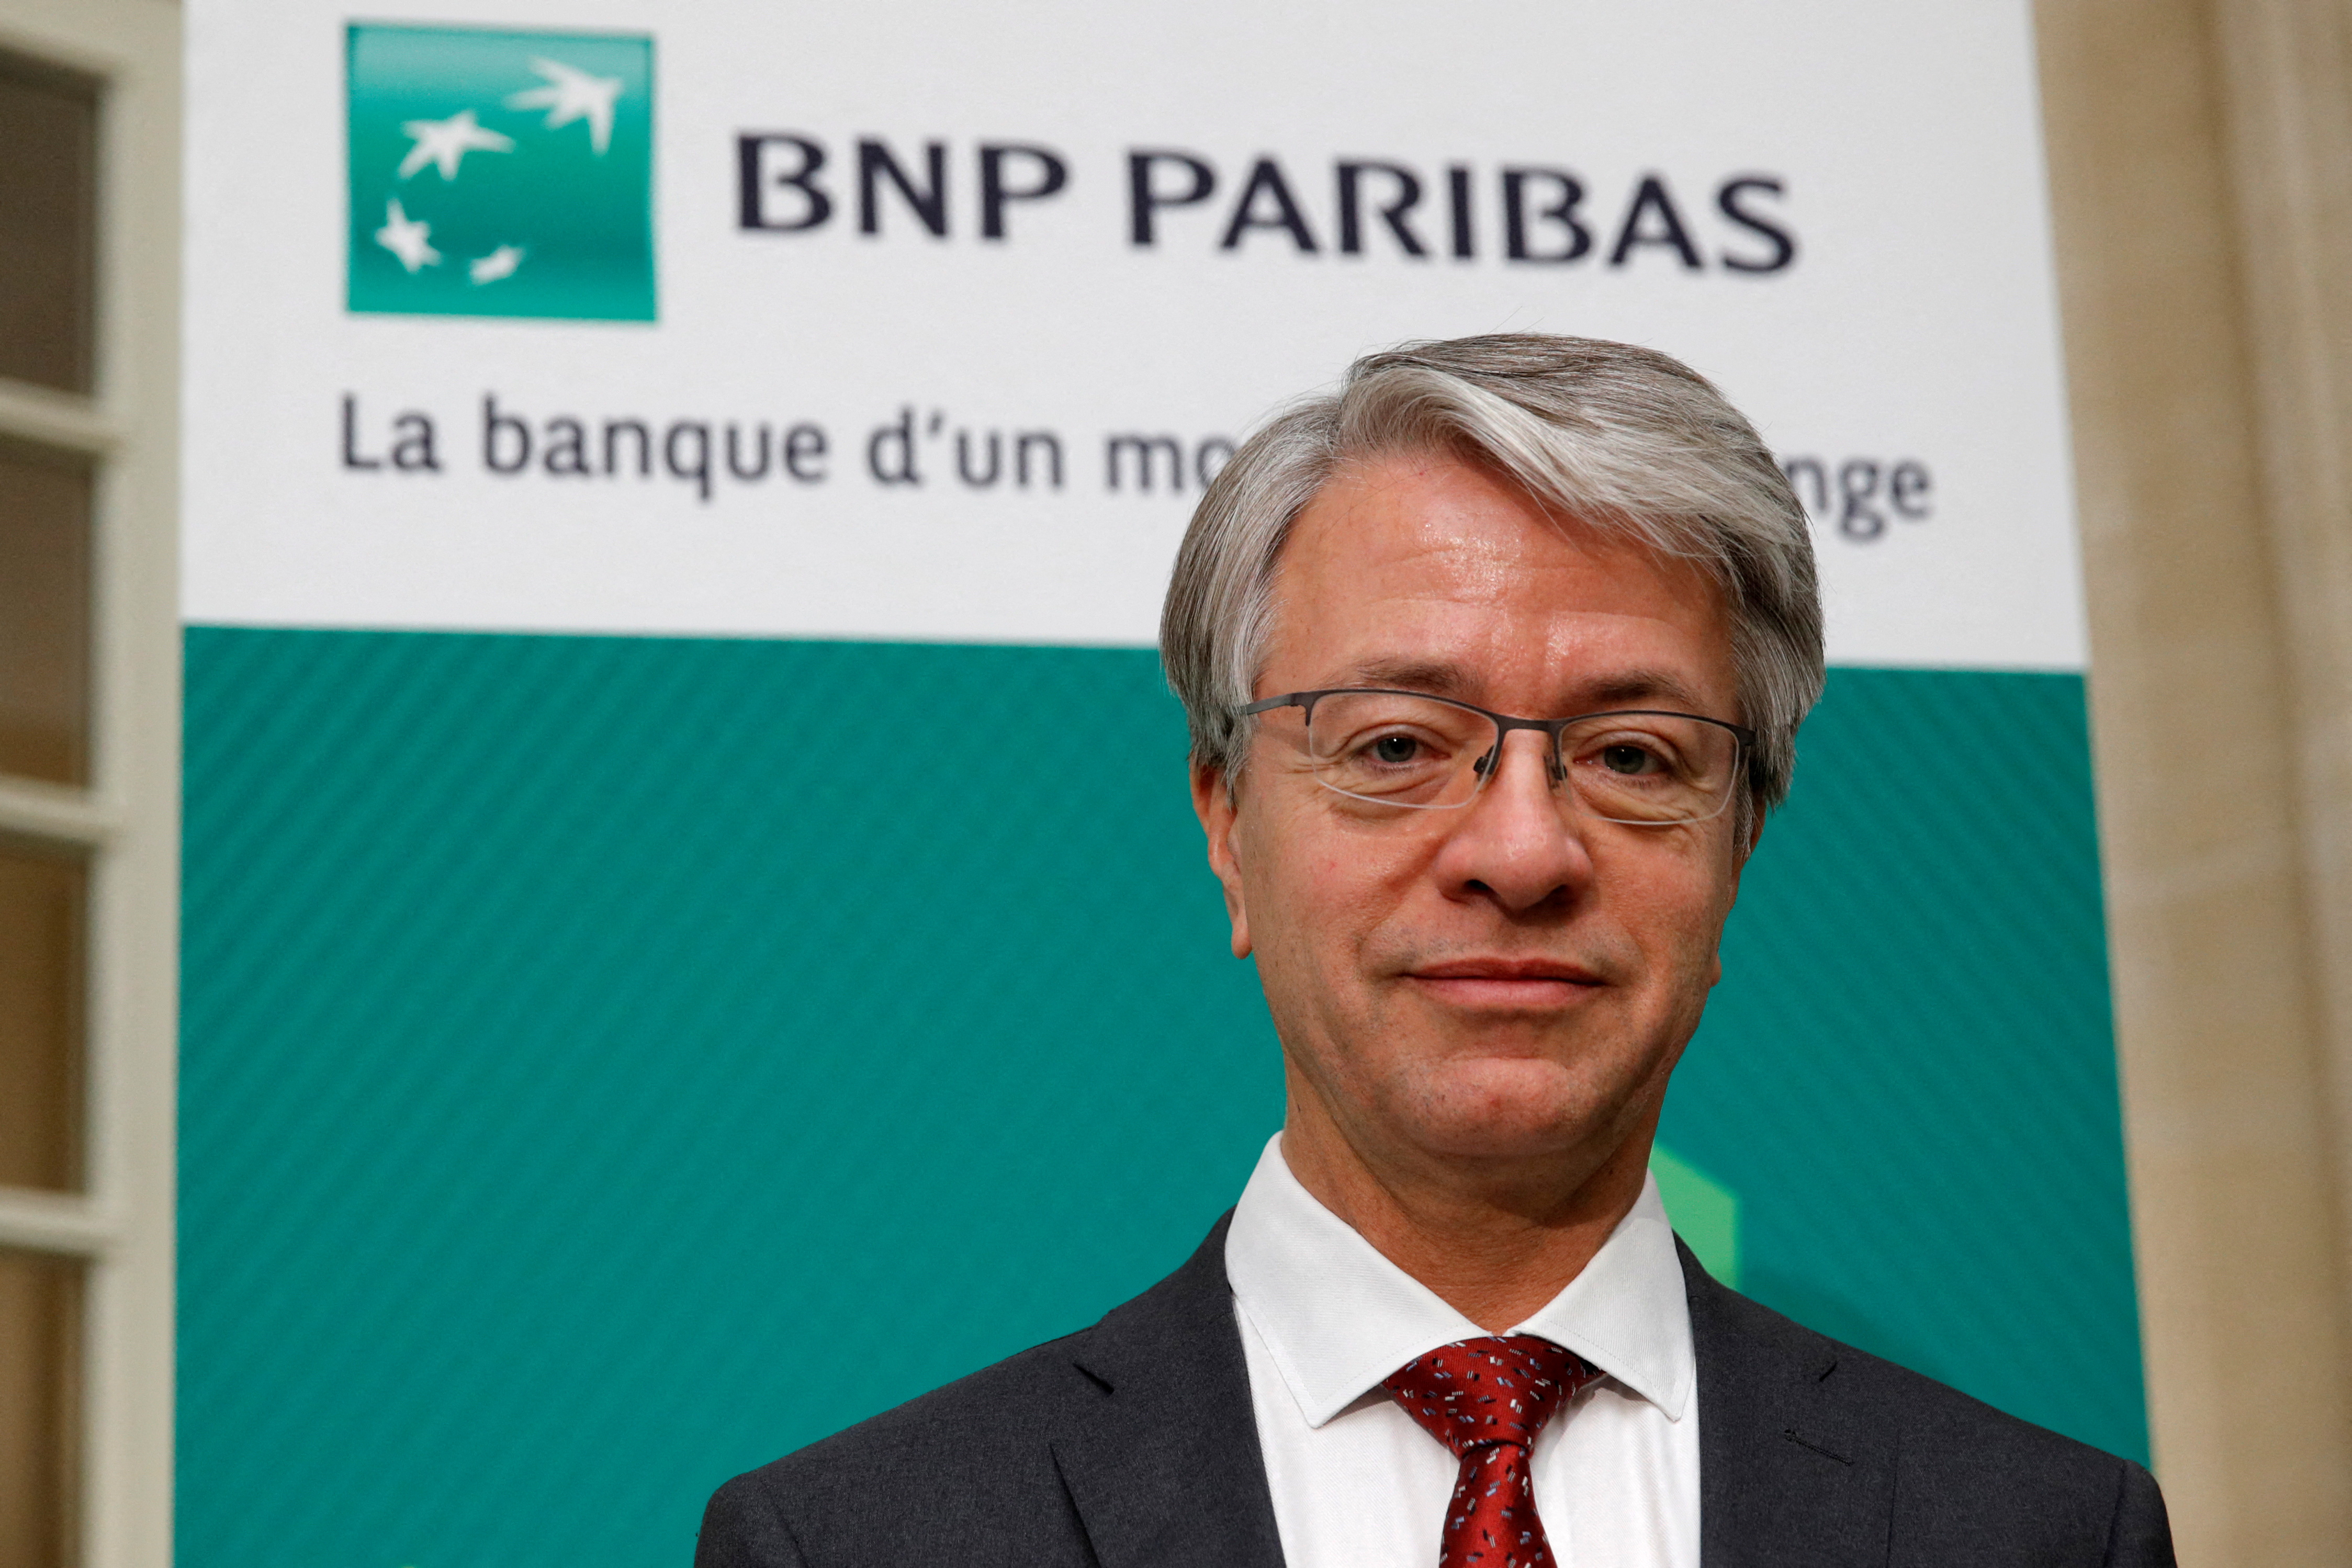 BNP Paribas Chief Executive Officer Jean-Laurent Bonnafe poses before a news conference to present the bank's 2018 second quarter results in Paris, France, August 1, 2018.  REUTERS/Philippe Wojazer/File Photo